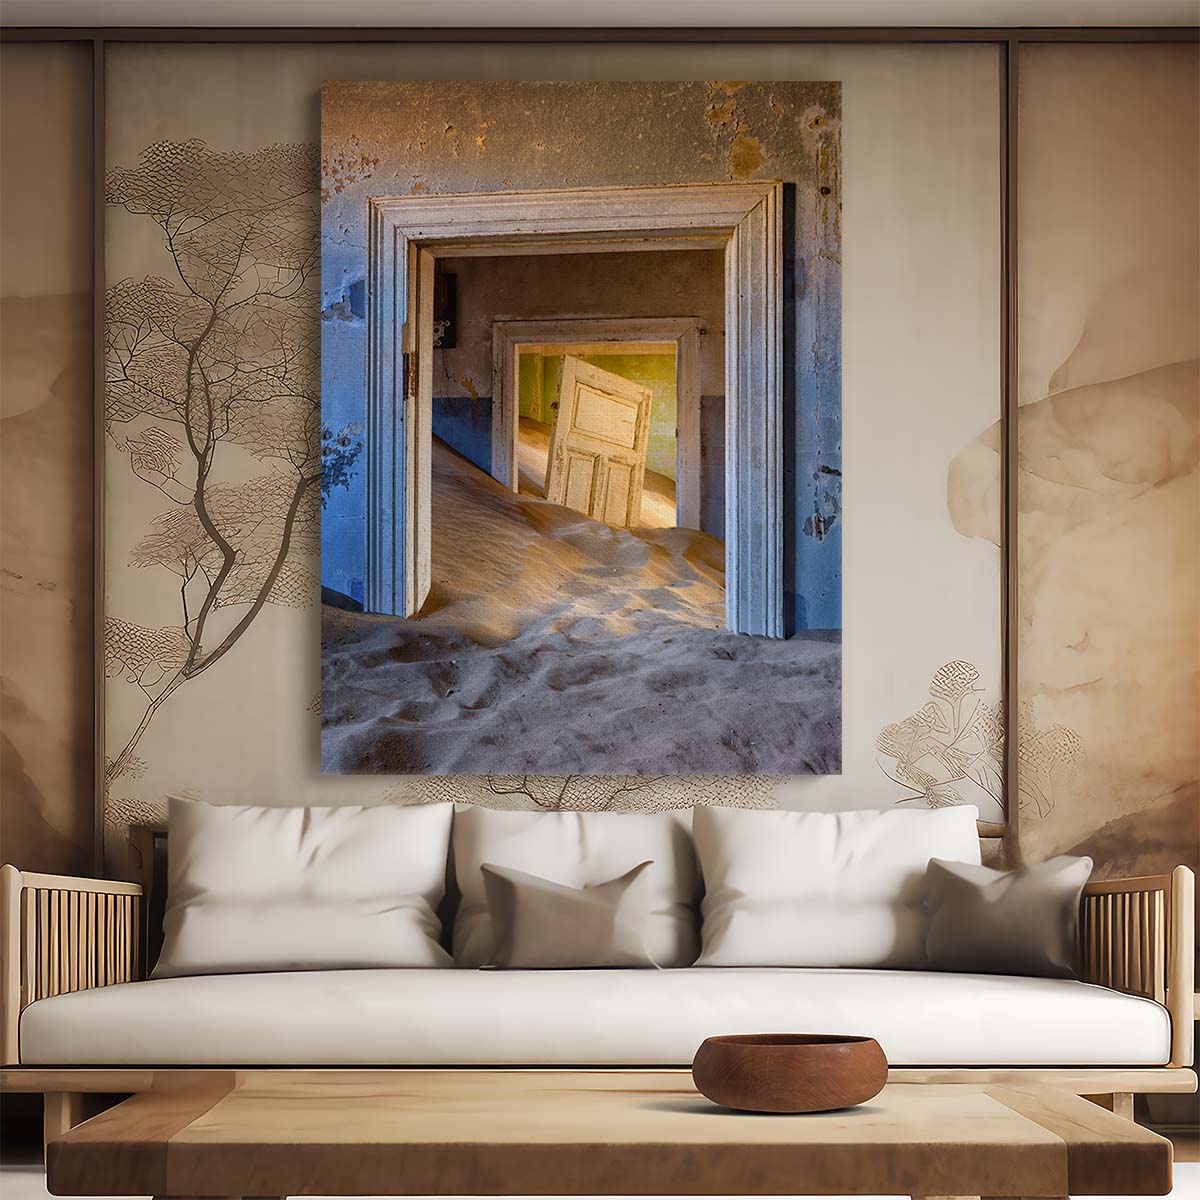 Abandoned Namibian House in Sand Dune, Urbex Photography Art by Luxuriance Designs, made in USA